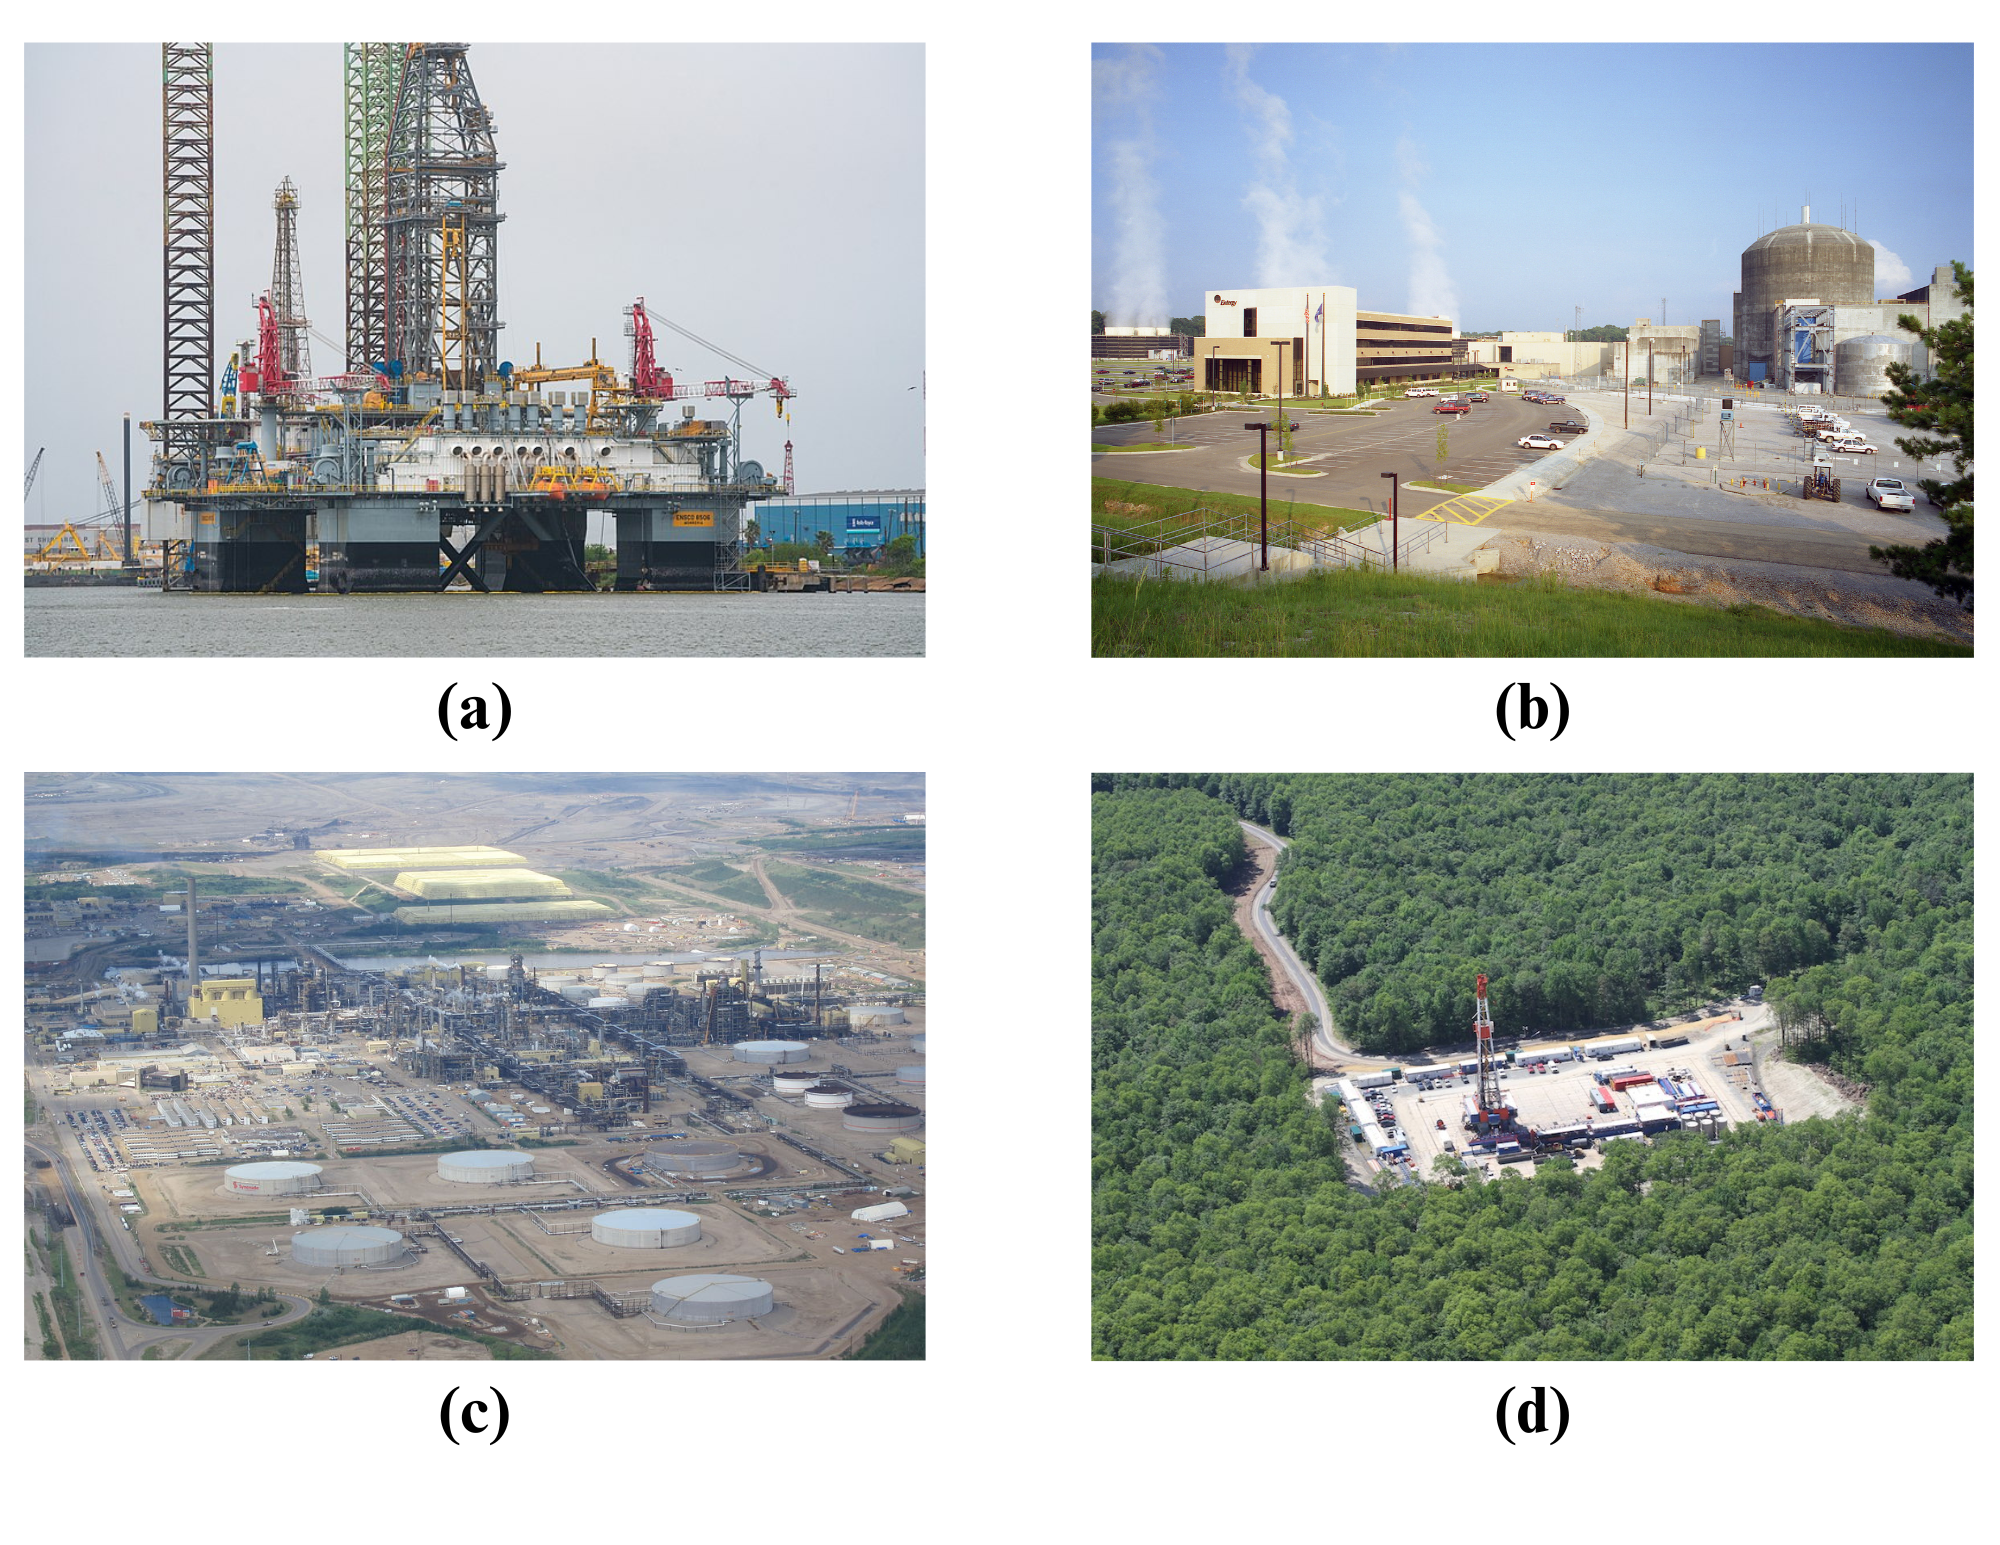 This image shows four pictures. Part A shows an offshore semi-submersible oil drilling rig in the Port of Galveston, Texas, in the Gulf of Mexico. Part B shows the nuclear power plant, River Bend Station, Unit 1, near St. Francisville, Louisiana. Part C shows the Syncrude Mildred Lake Plant in Fort McMurray, Alberta Canada. This plant uses tar sands, soil, and wood debris to produce oil. Part D shows an unconventional shale gas well in Tioga County, Pennsylvania.